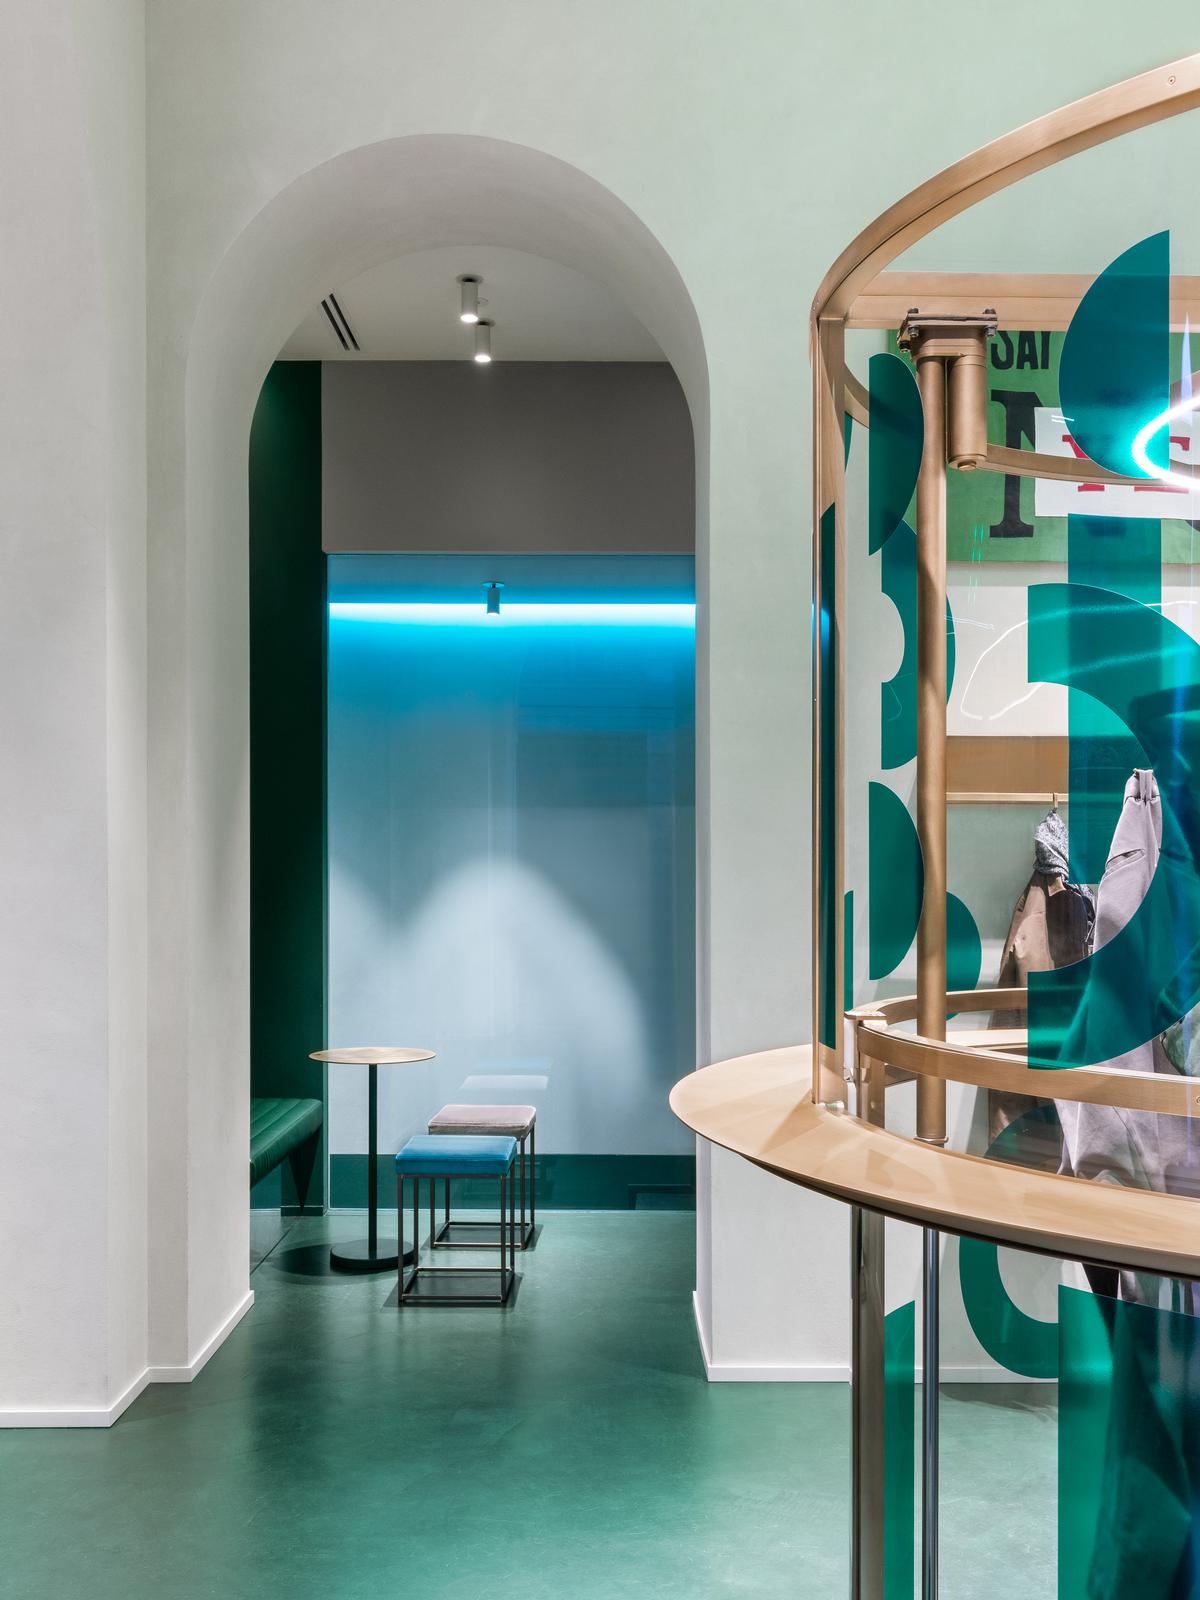 Once descended, the machine provides a counter on which for guests to rest their drinks and a display case for the clothing now contained within / Alessandro Saletta for DSL Studio